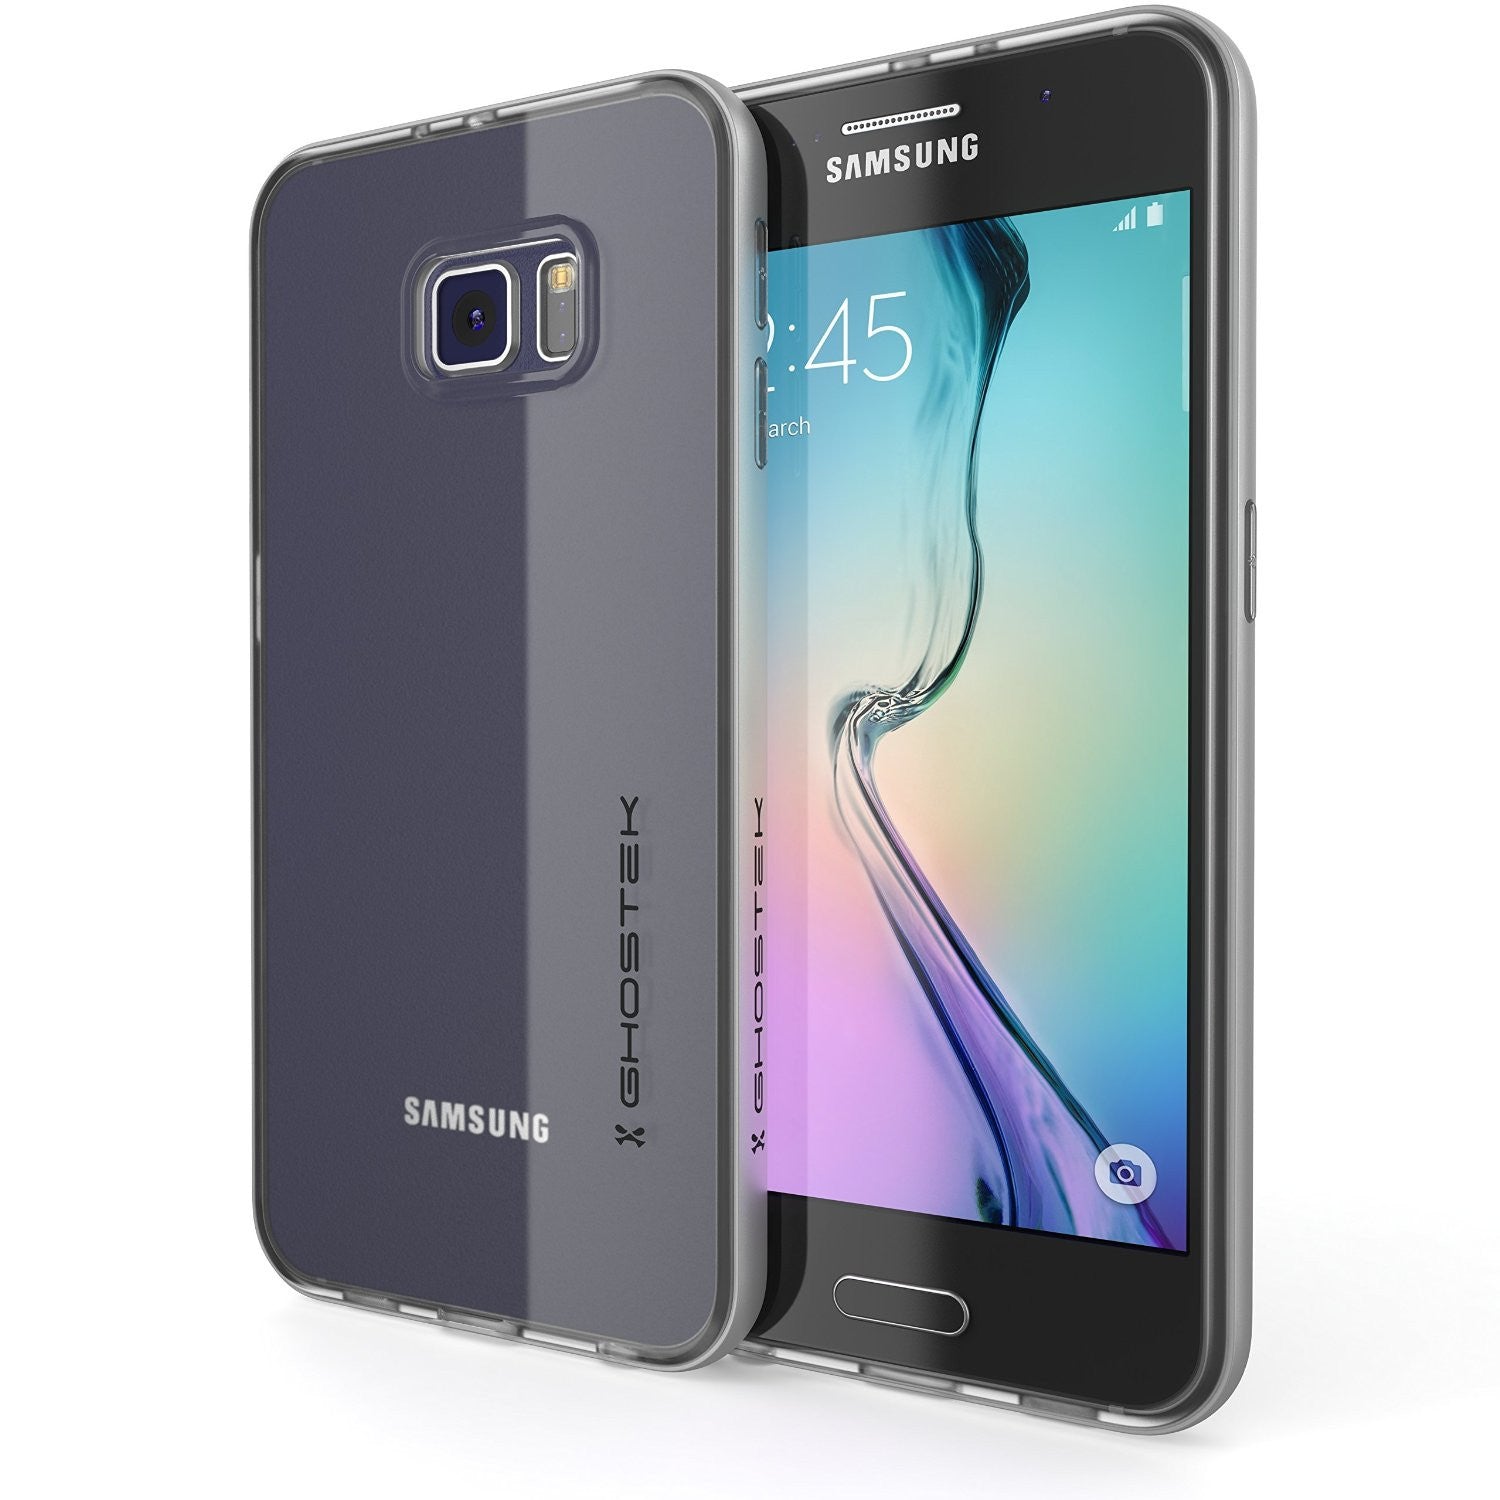 Galaxy S6 Case, Ghostek Cloak Series Silver  Slim Premium Protective Hybrid Impact Glass Armor (Color in image: silver)